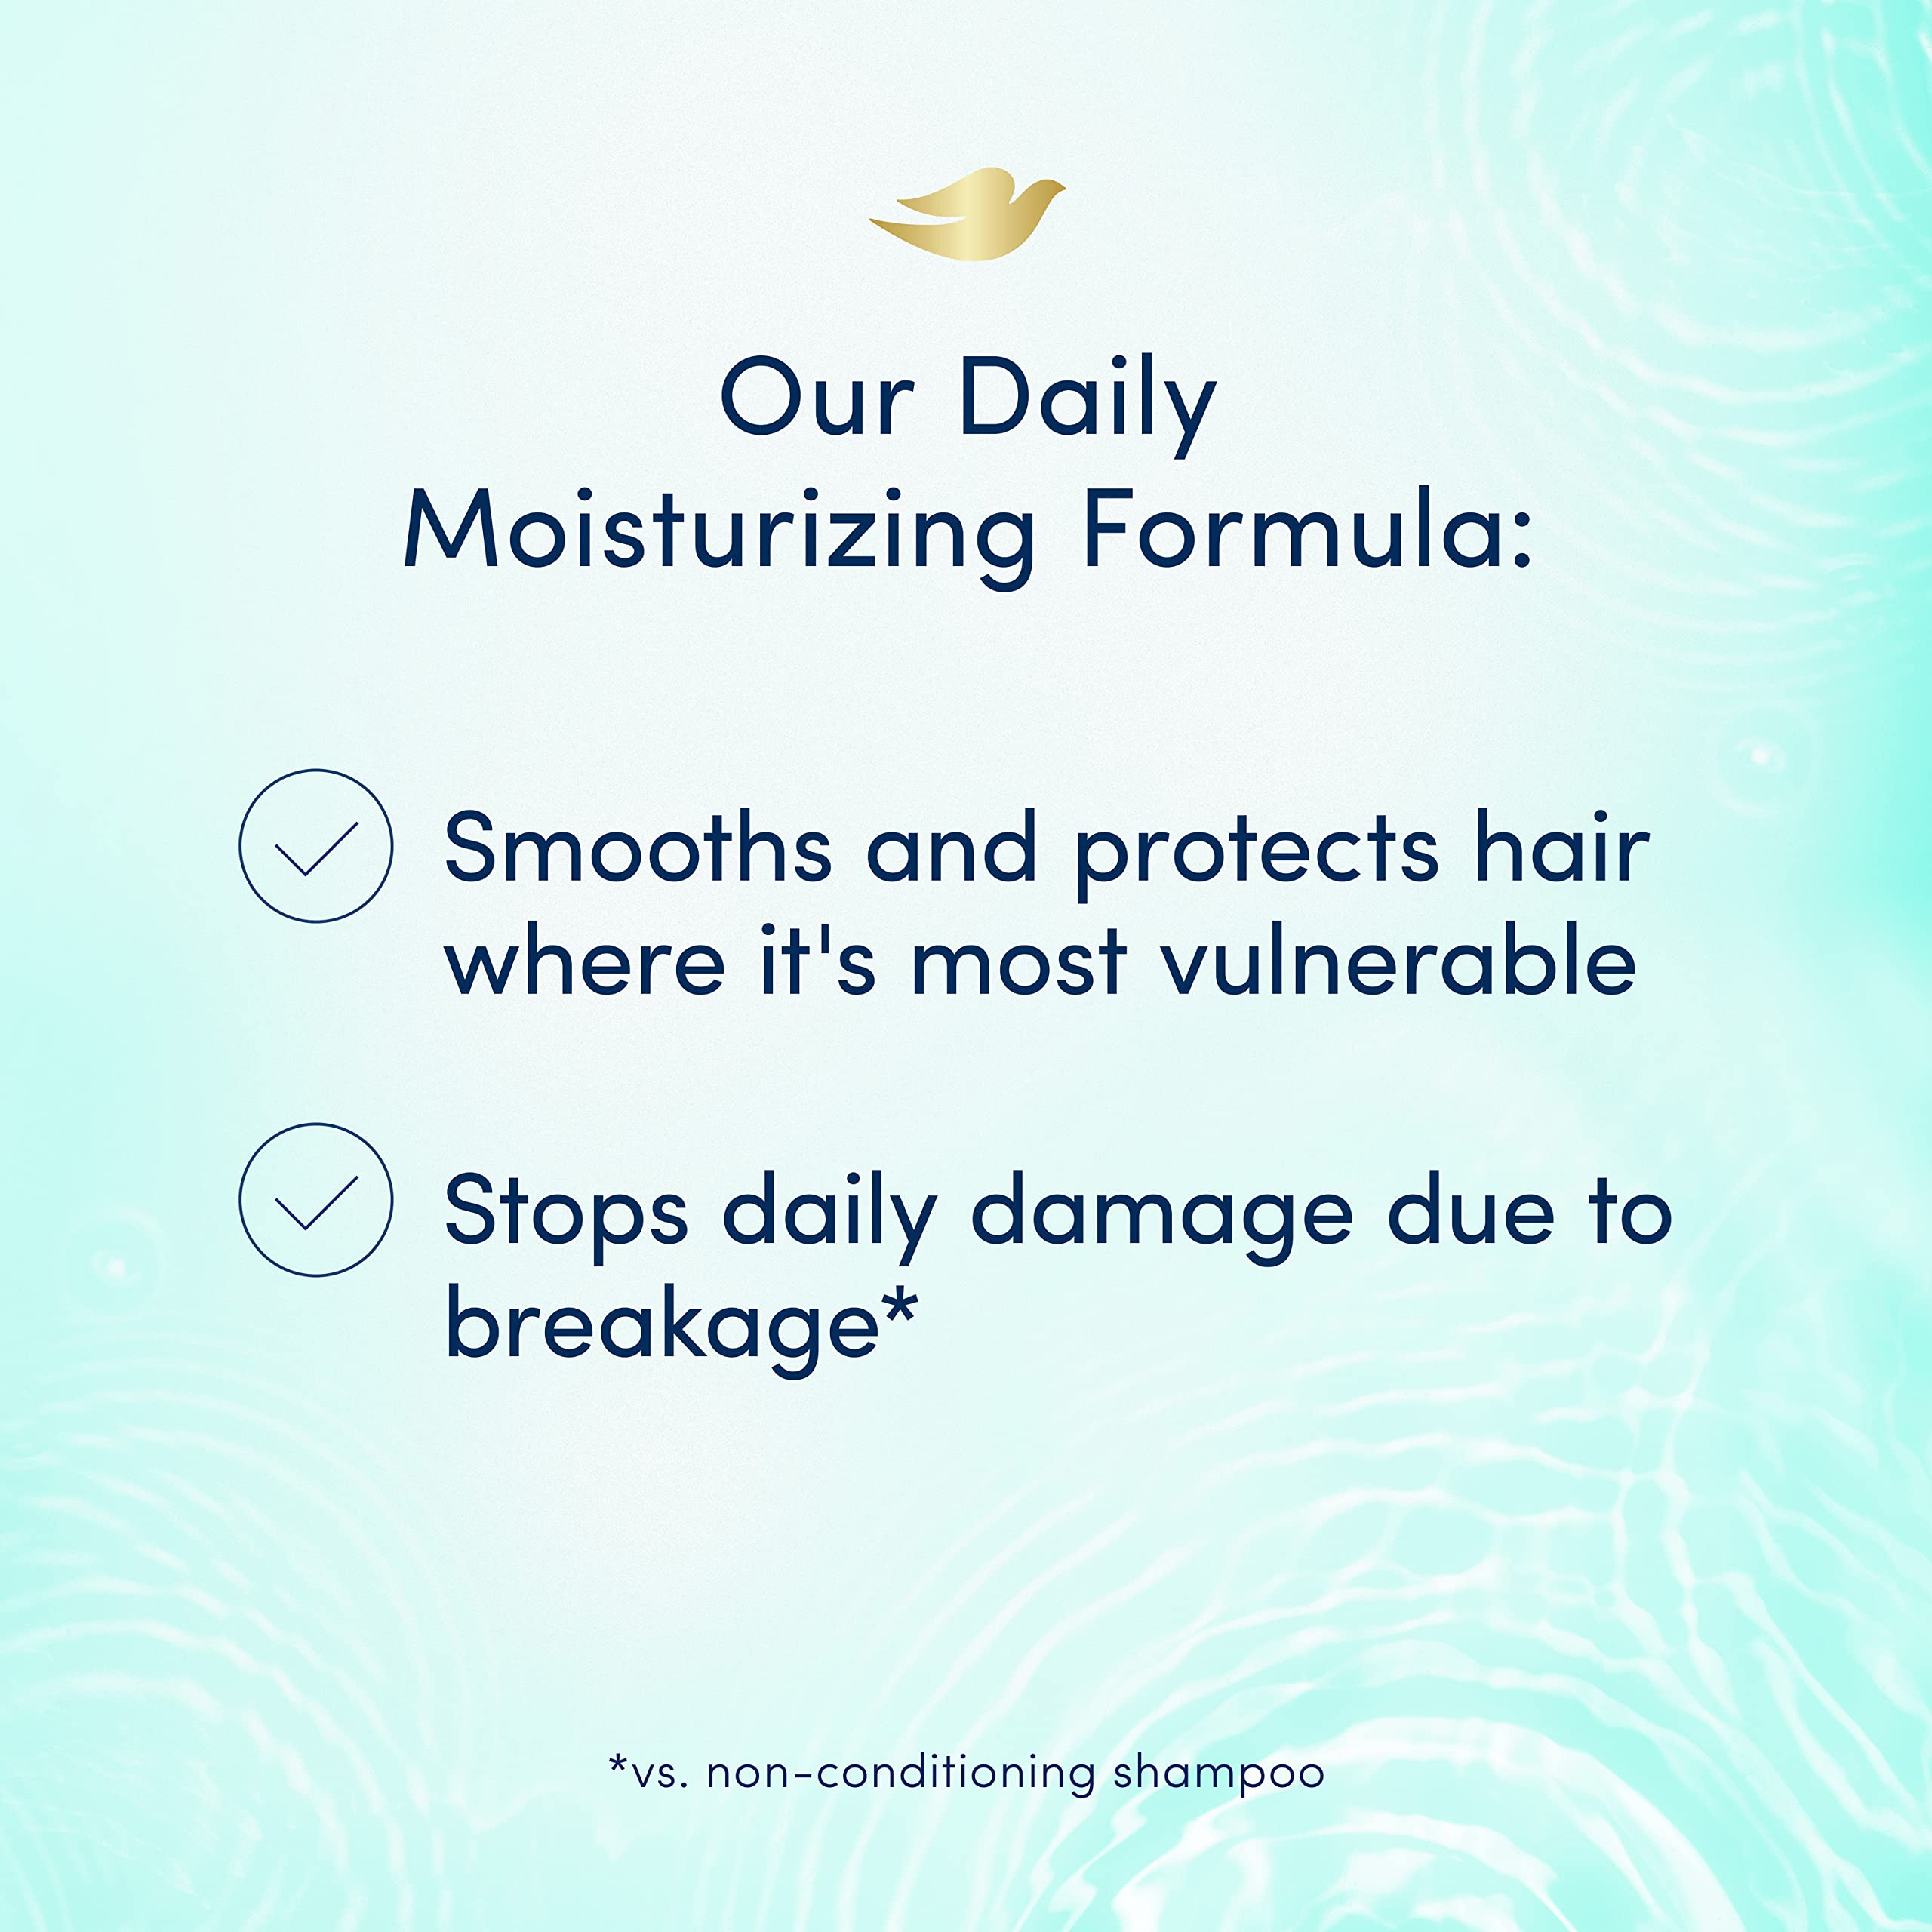 Dove Shampoo & Conditioner Daily Moisture , 20.4 Fl.Ounce (Pack of 4)